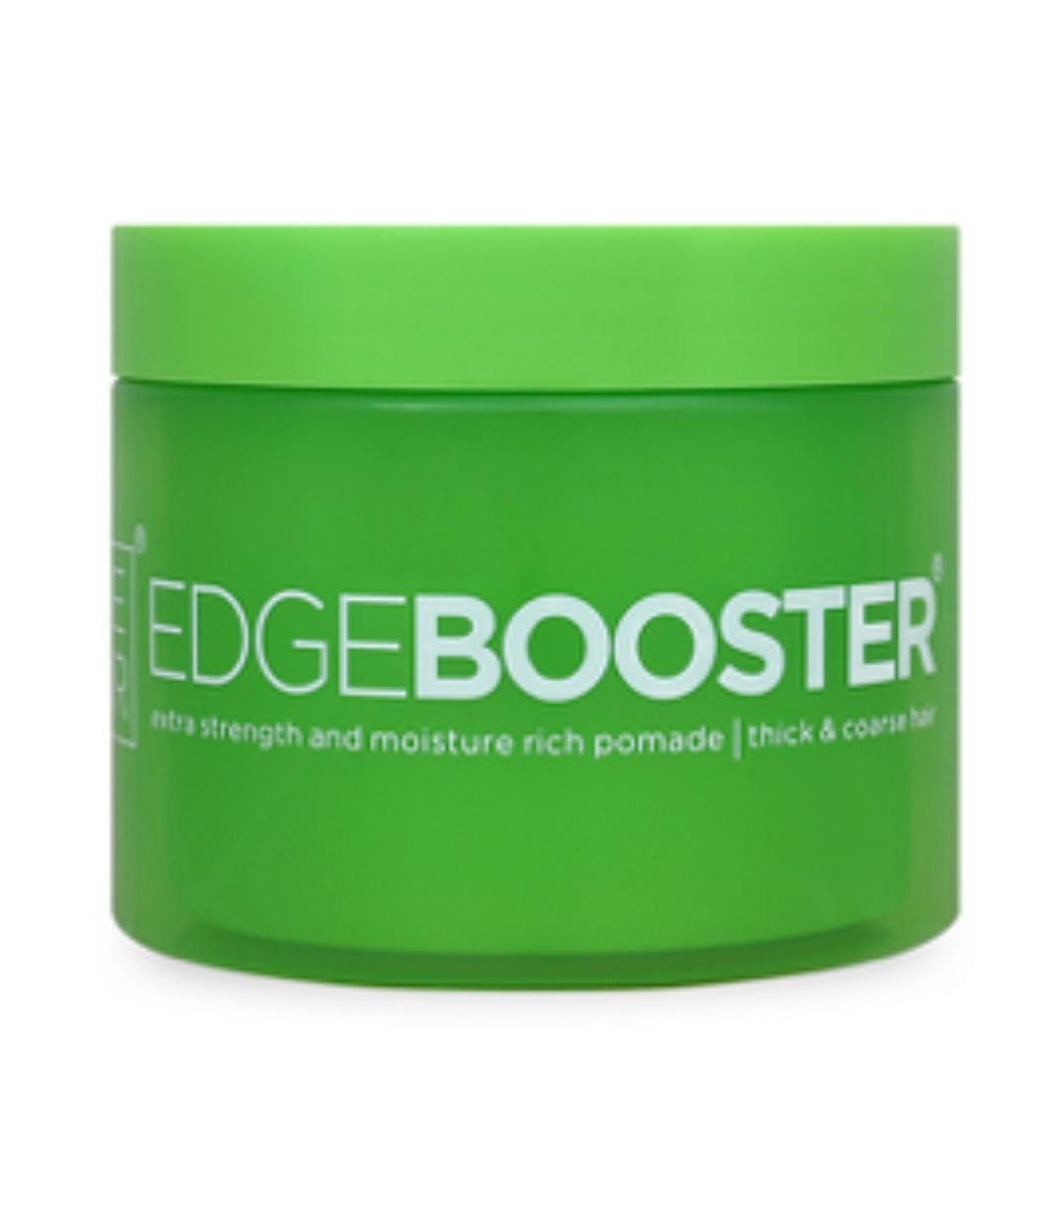 EdgeBooster Family Size